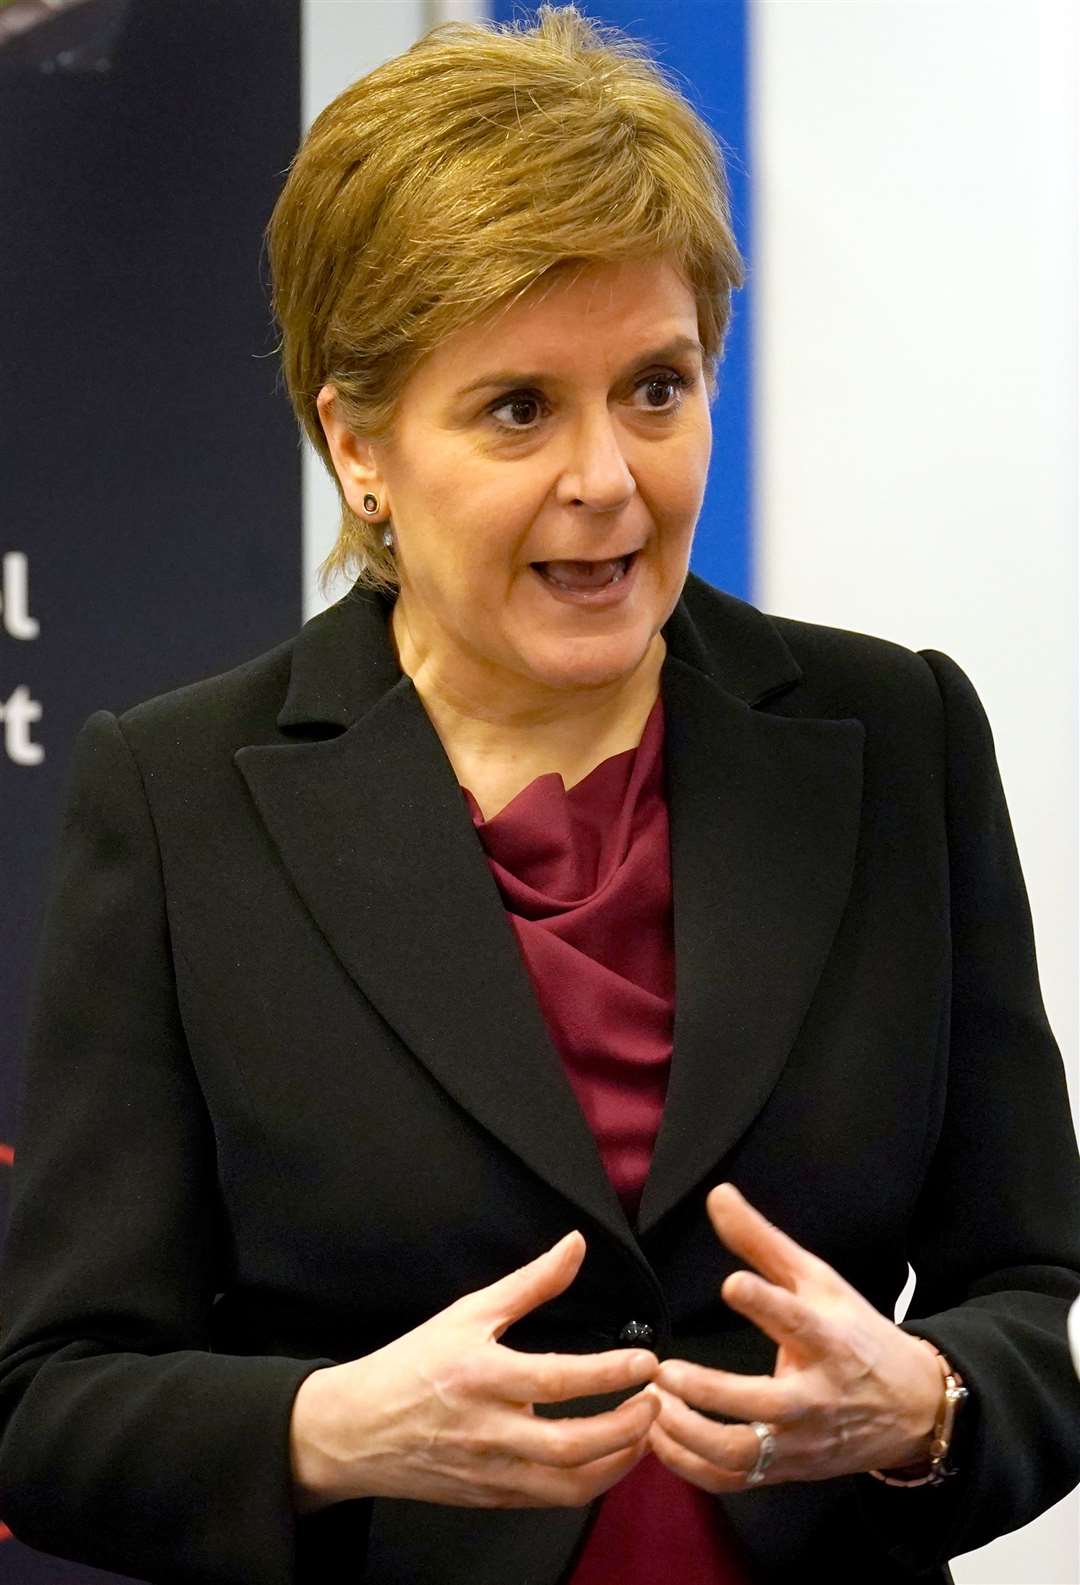 Nicola Sturgeon said strikes by teachers are no in the interest of young people (Andrew Milligan/PA)